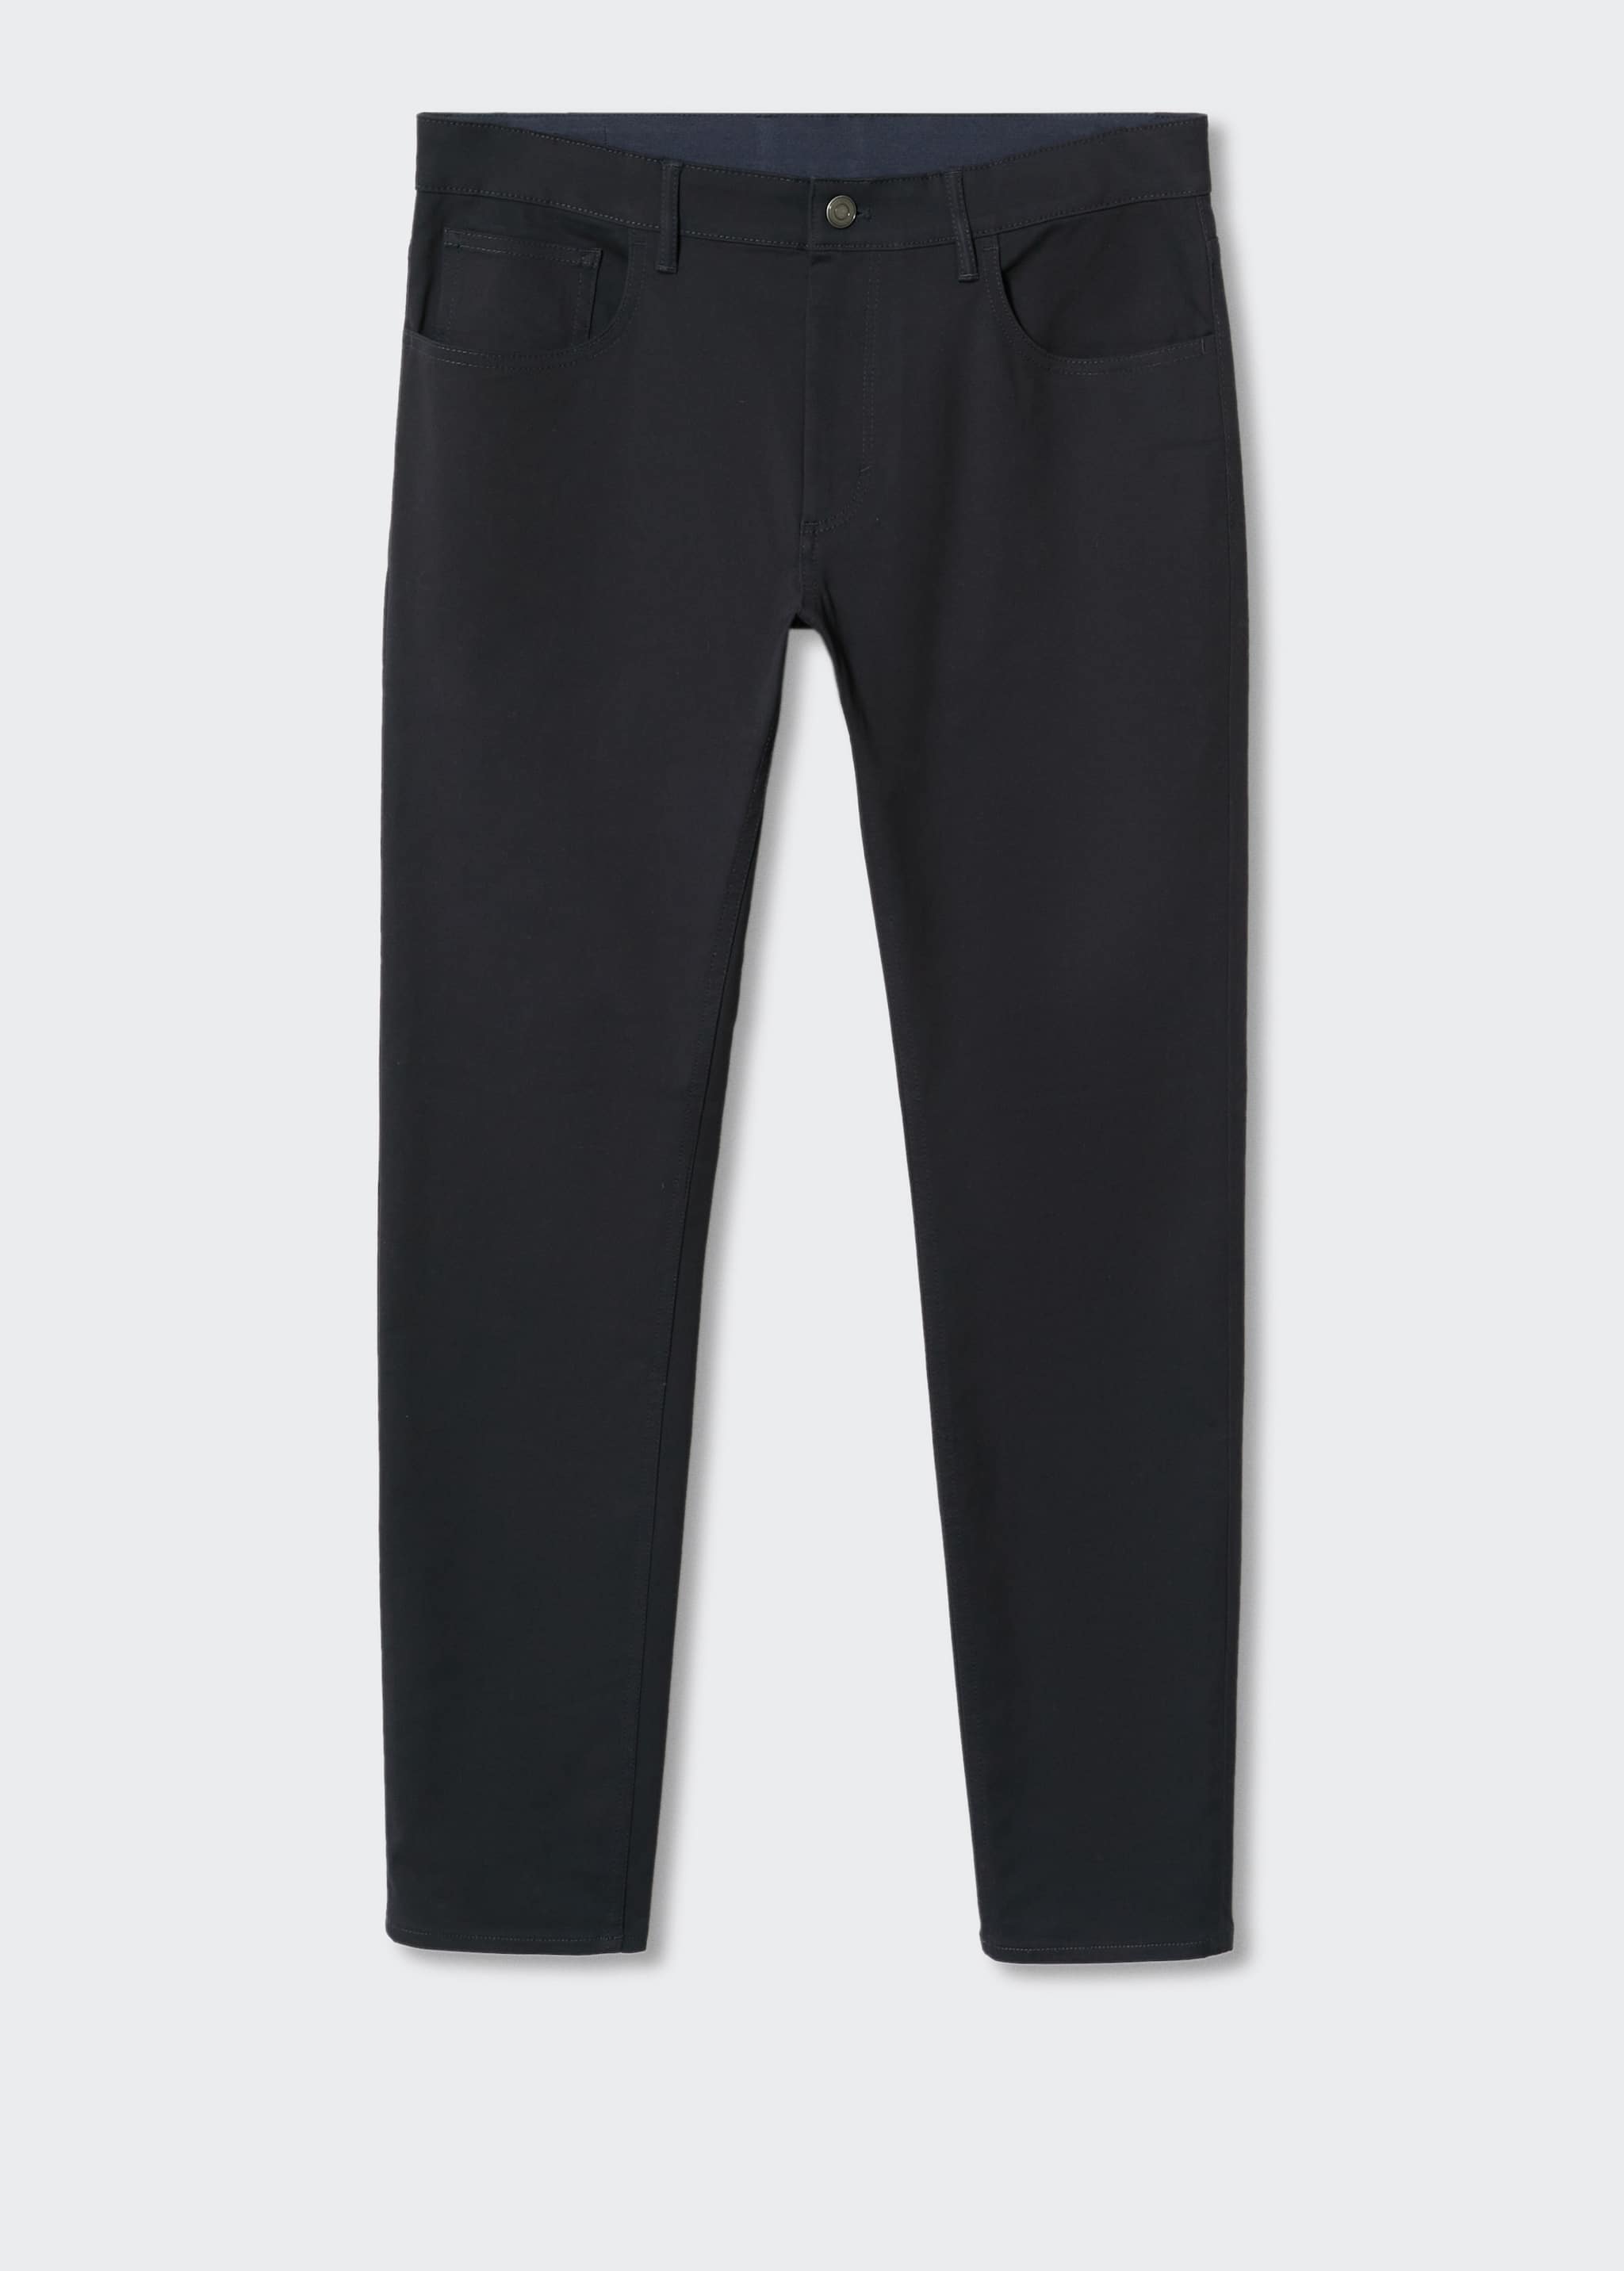 Slim fit denim-effect serge trousers - Article without model